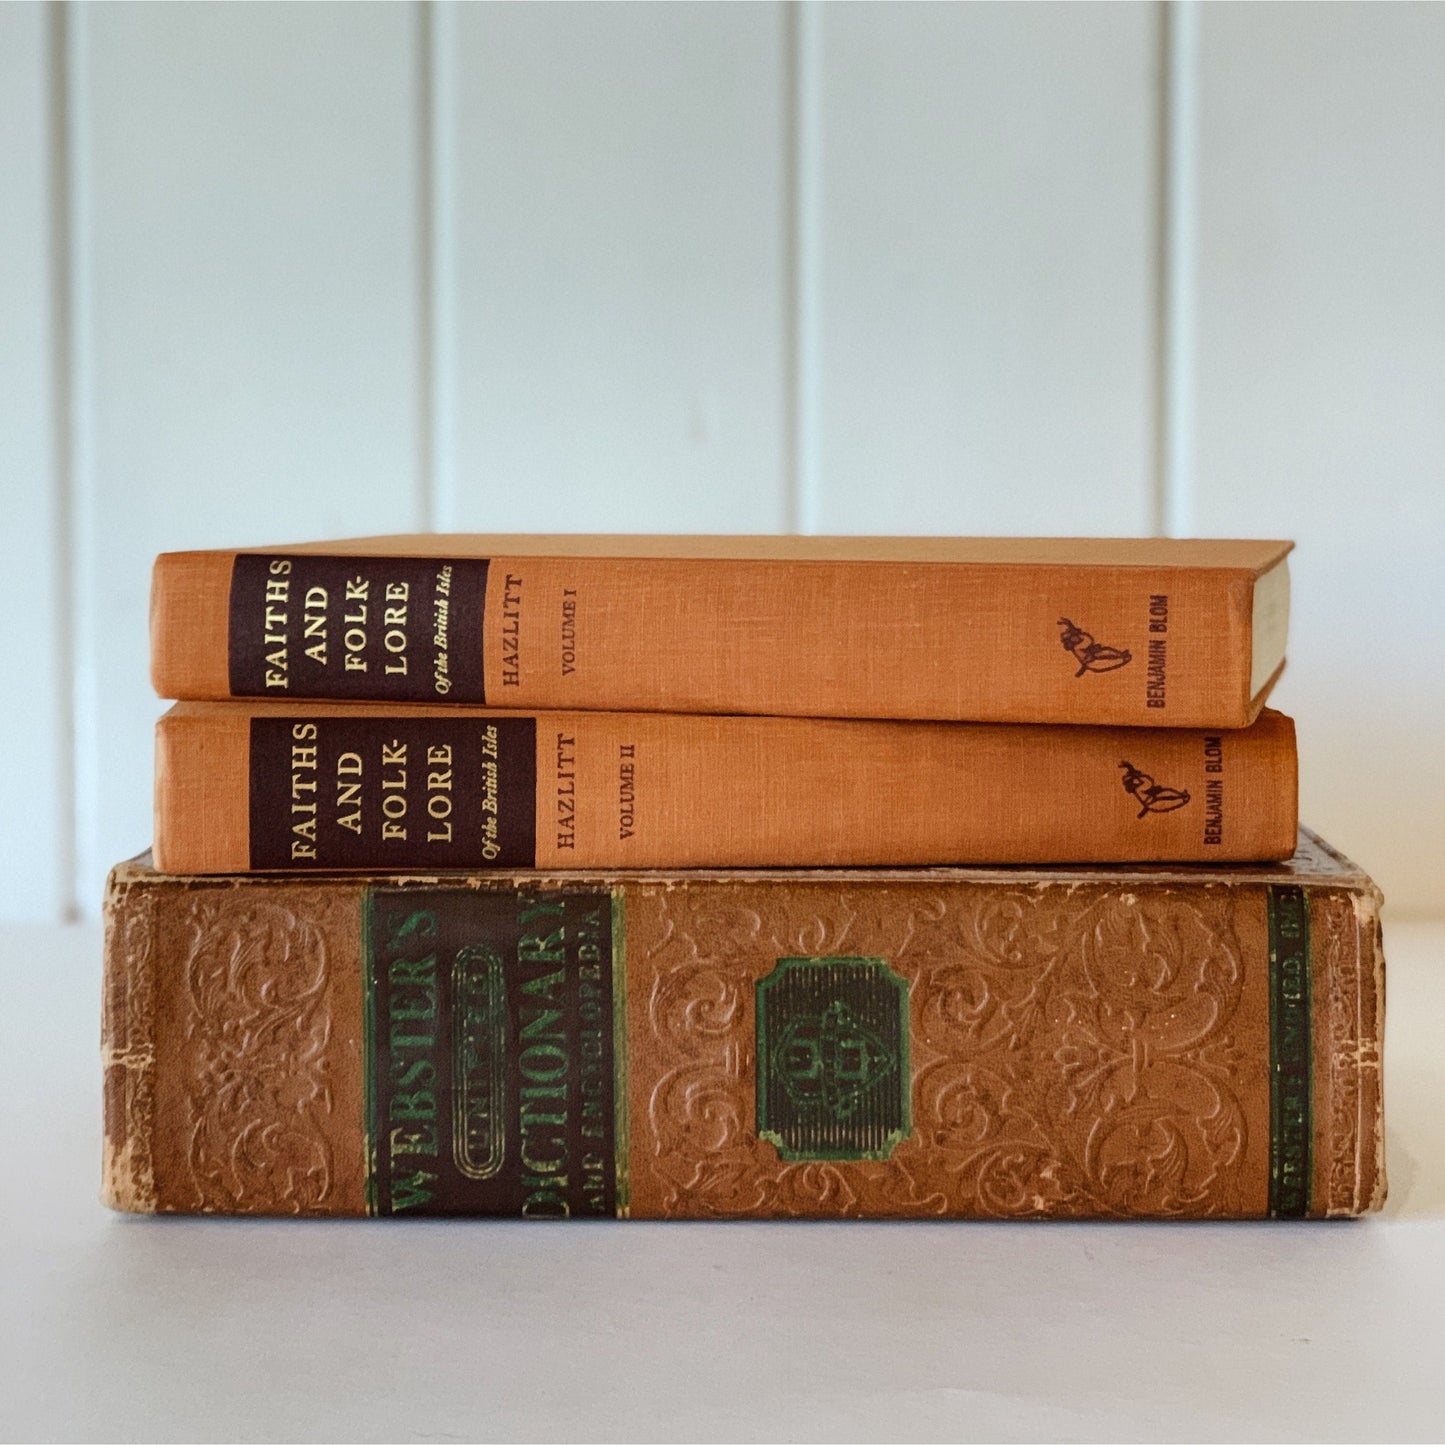 Oversized Vintage Reference Books for Decor, Brown and Copper Retro Books